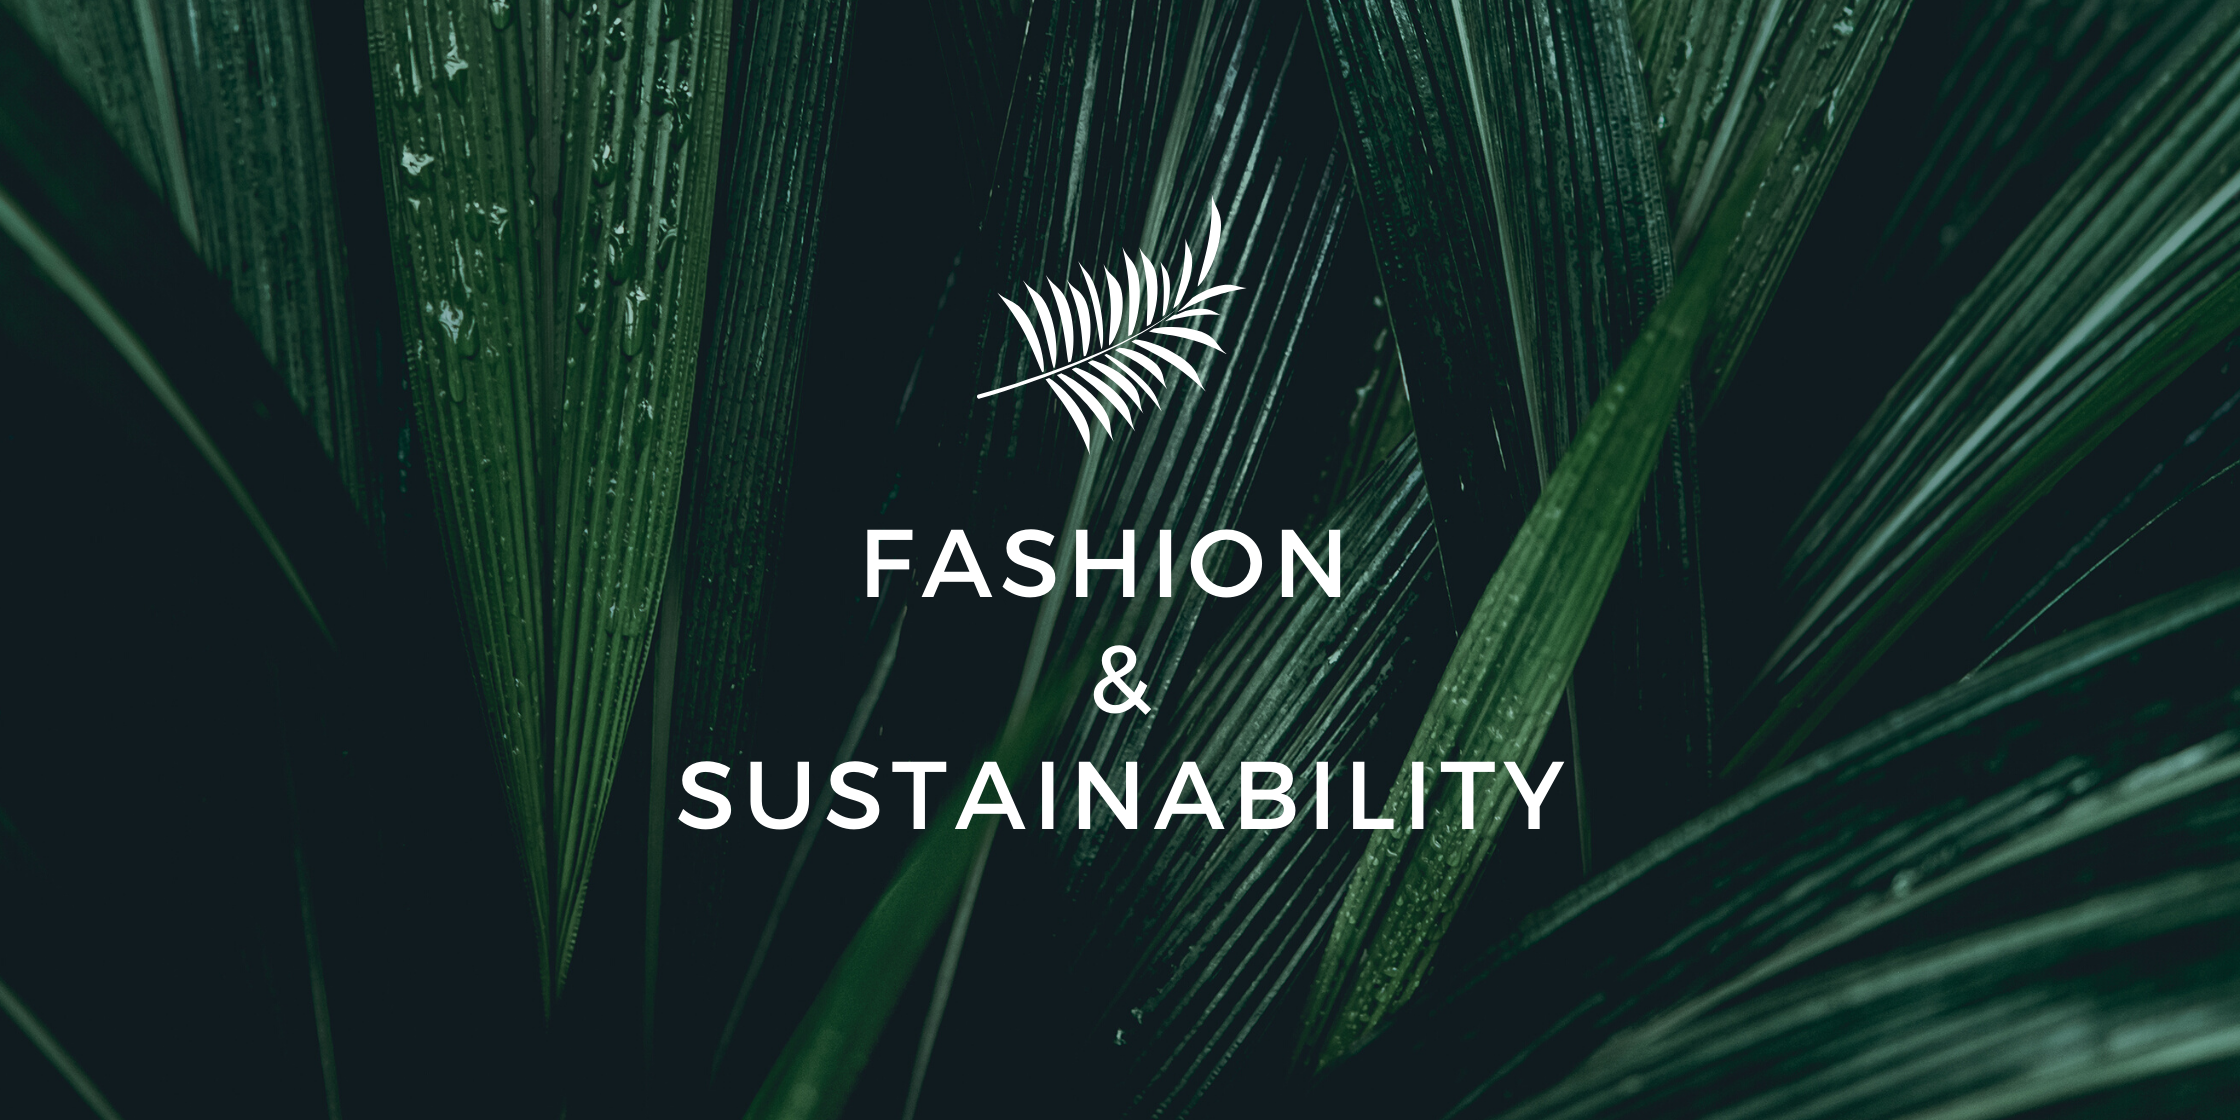 7 startups that make it possible to combine style & sustainability